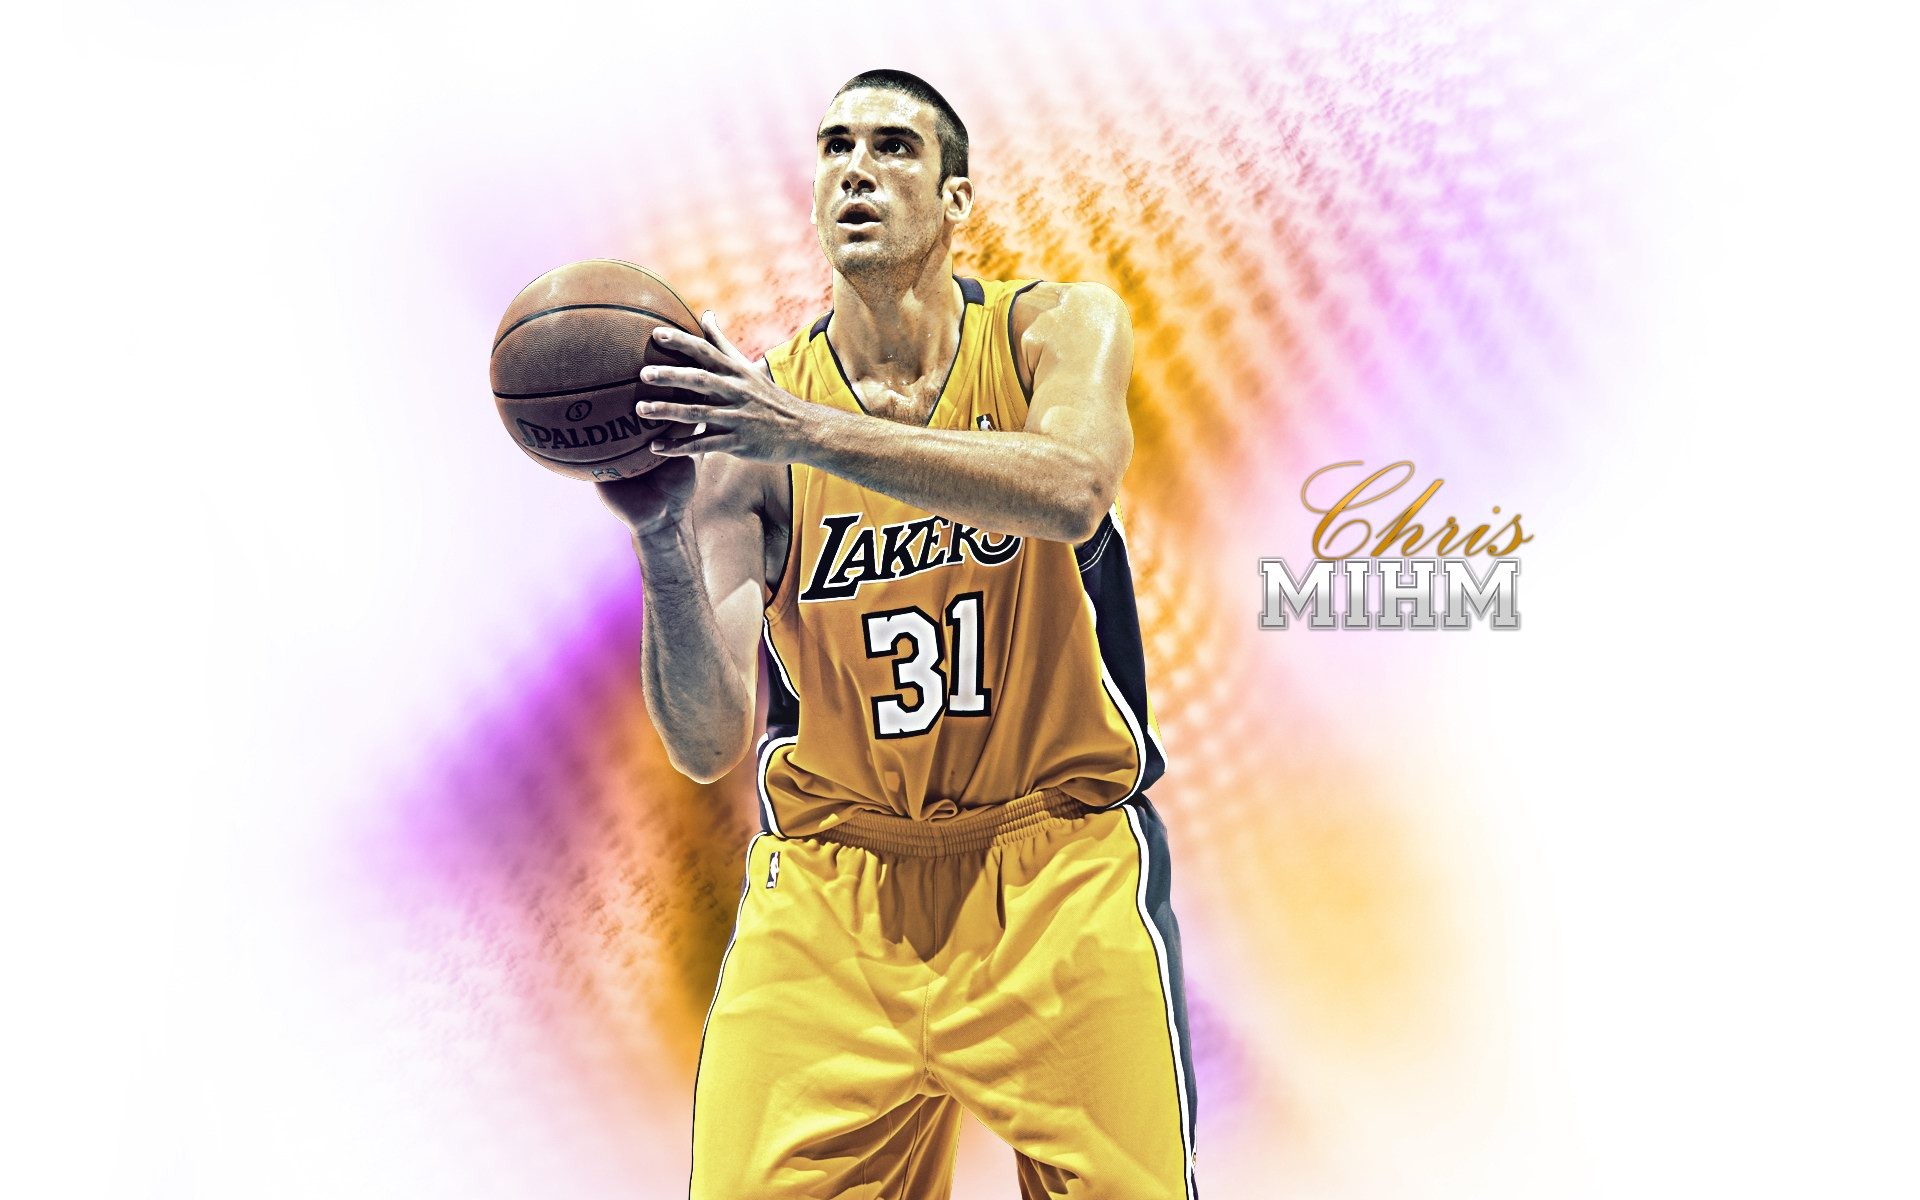 Los Angeles Lakers Official Wallpaper #5 - 1920x1200